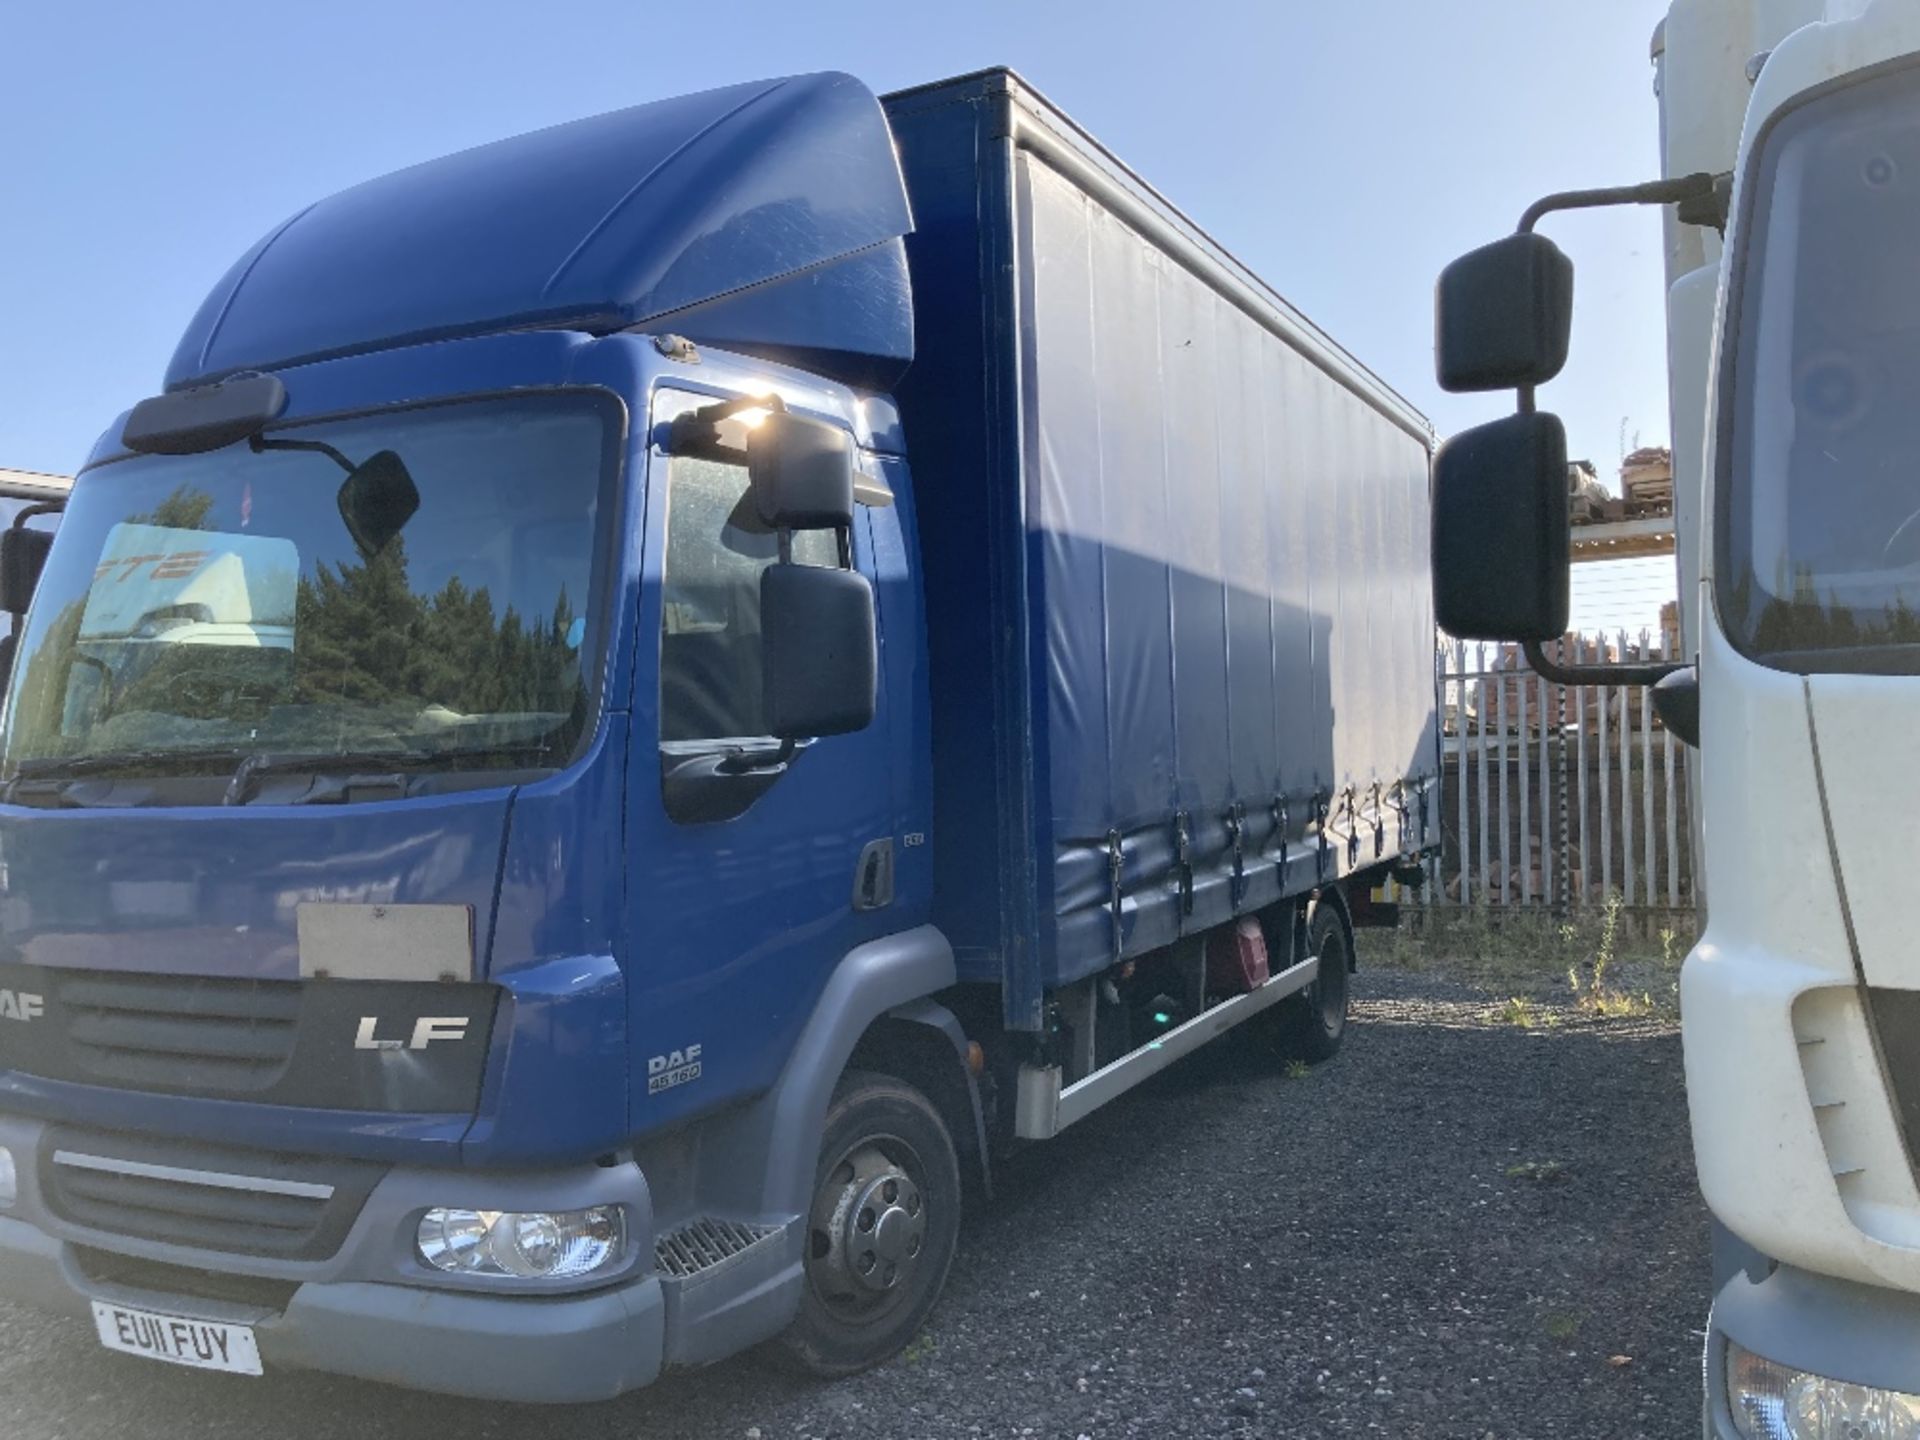 DAF 45.160 7.5T HGV Curtain Sider (MOT Certificate Expired) (EU11FUY) - Image 3 of 18